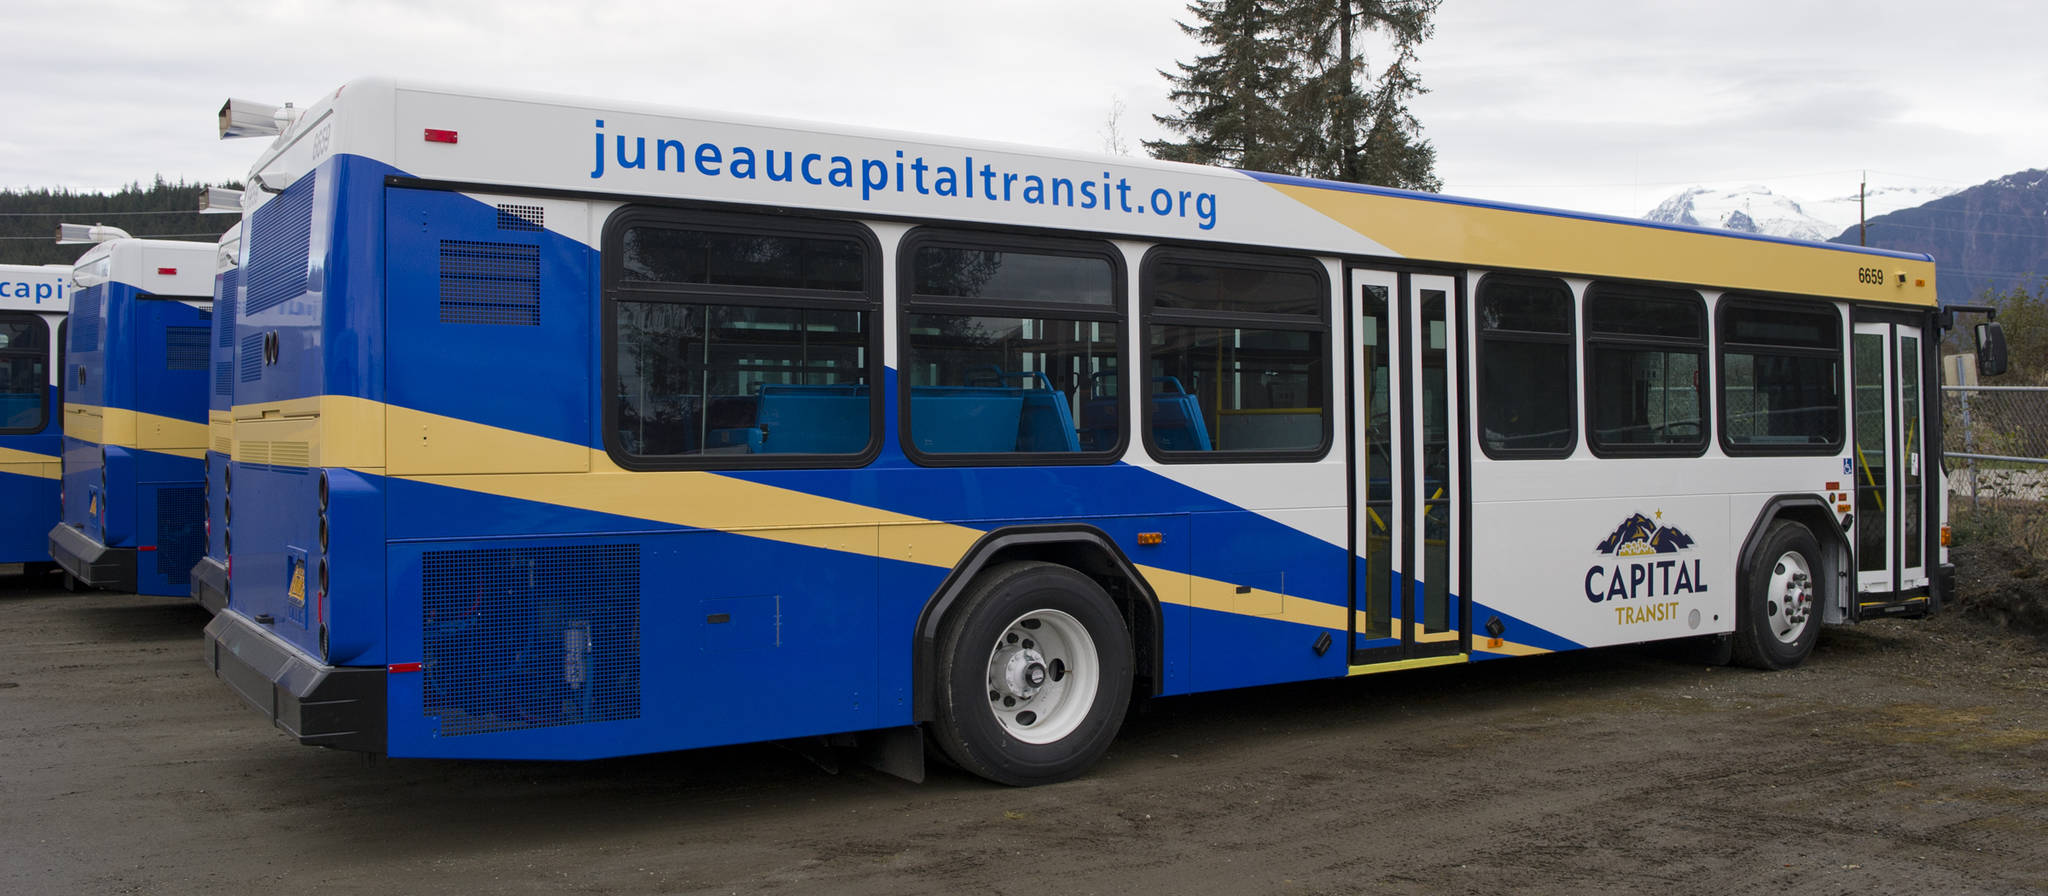 A Capital Transit bus is pictured in this 2016 file photo. (Michael Penn | Juneau Empire File)